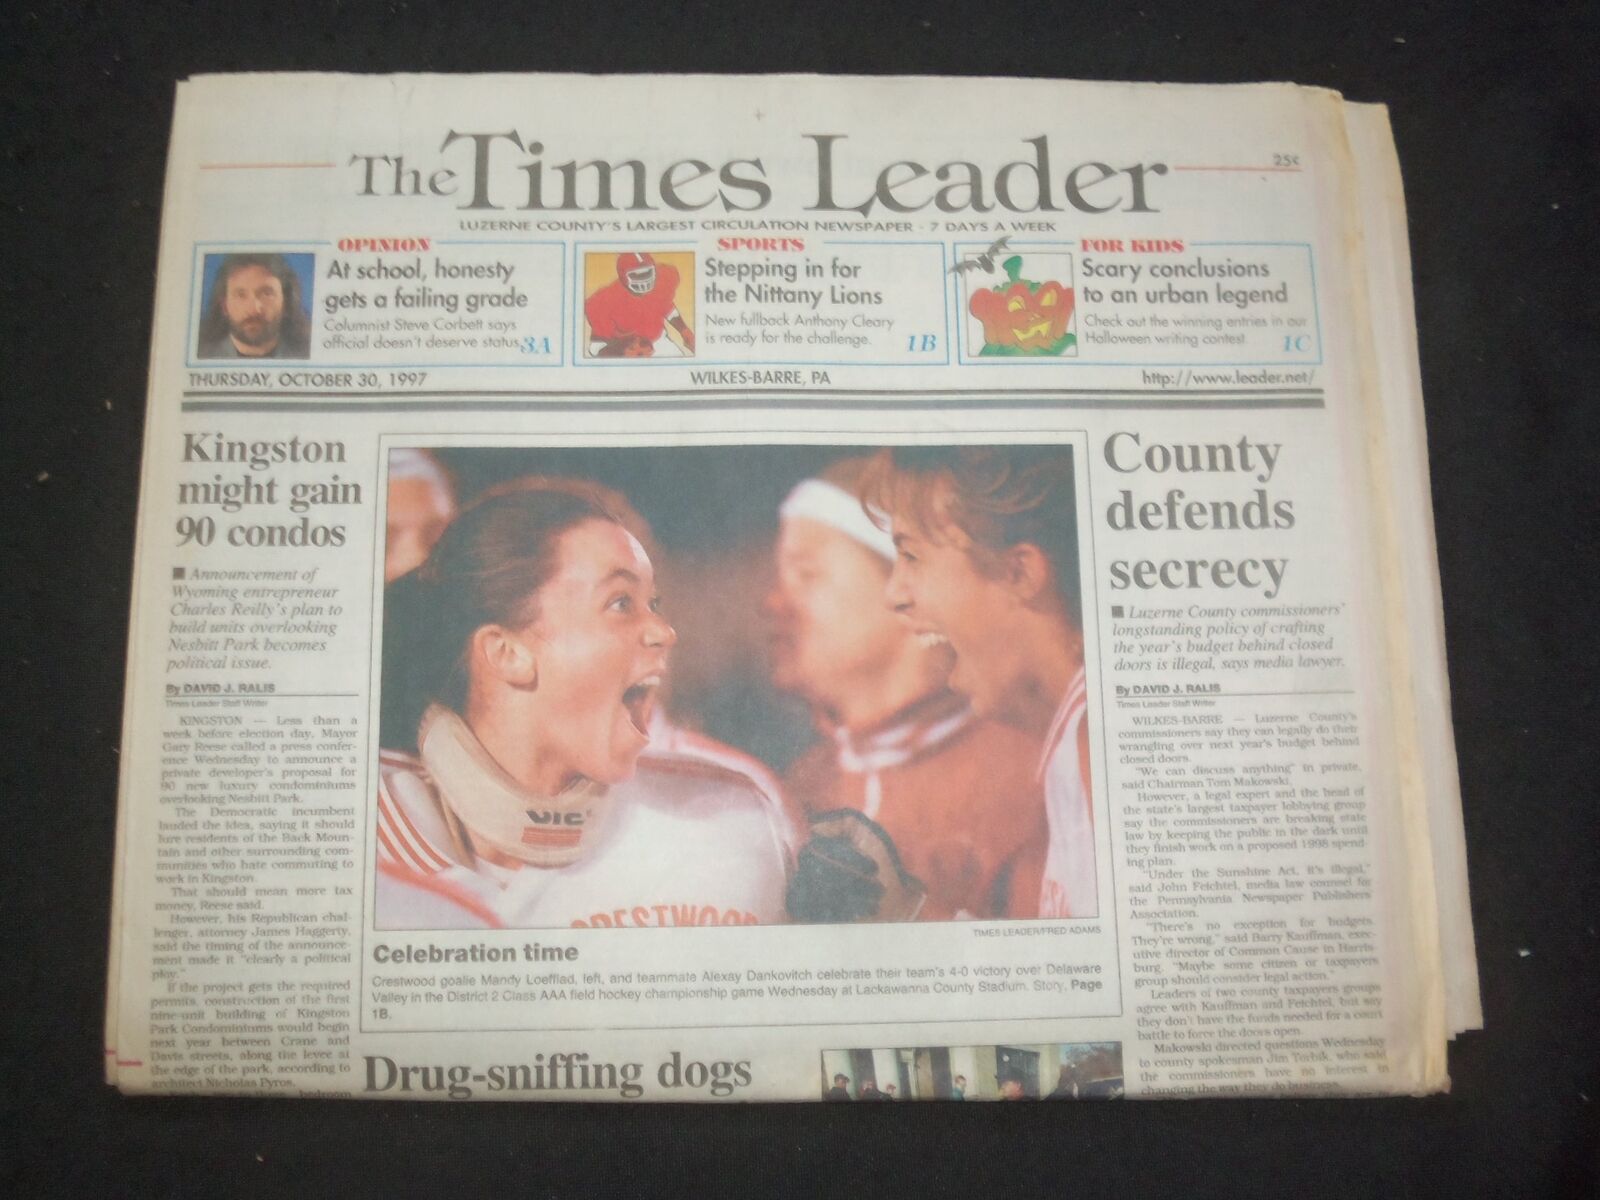 1997 OCT 30 WILKES-BARRE TIMES LEADER - LUZERNE COUNTY DEFENDS SECRECY - NP 7765